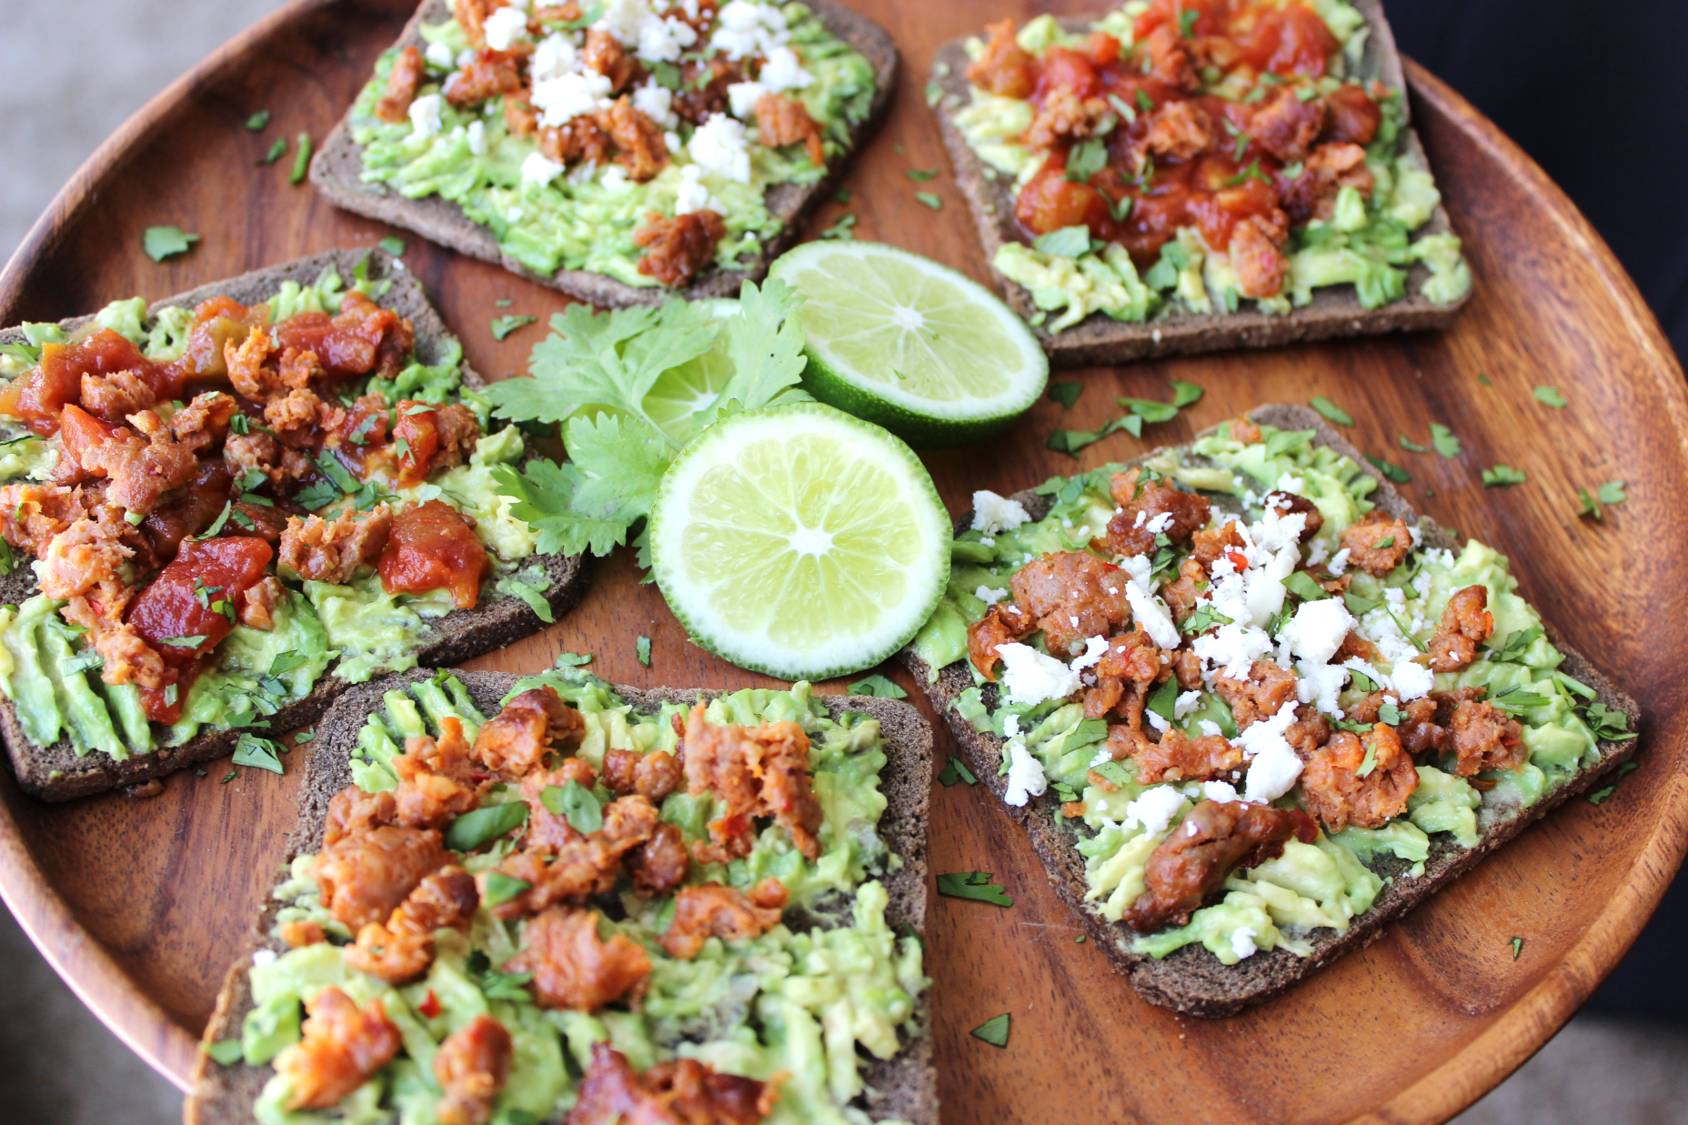 Avocado toast topped with Premio sausage crumbles garnished with lime and cilantro